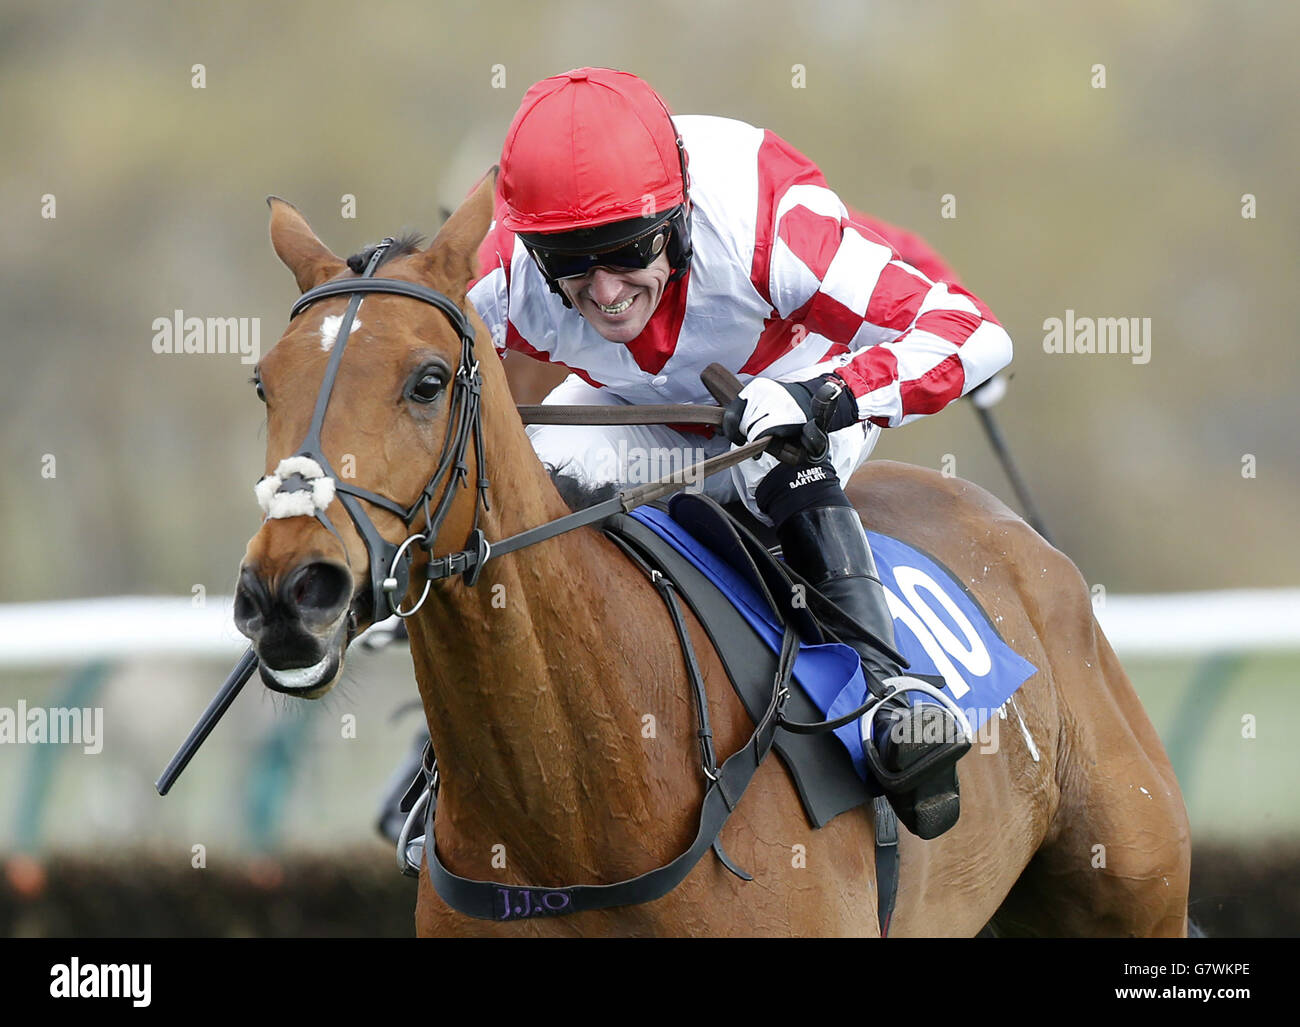 Capard King ridden by jockey Tony McCoy goes on to win the Abbott Risk Consulting Novices' Handicap Hurdle Race (Class 3) during the 2015 Coral Scottish Grand National Festival at Ayr Racecourse. Stock Photo